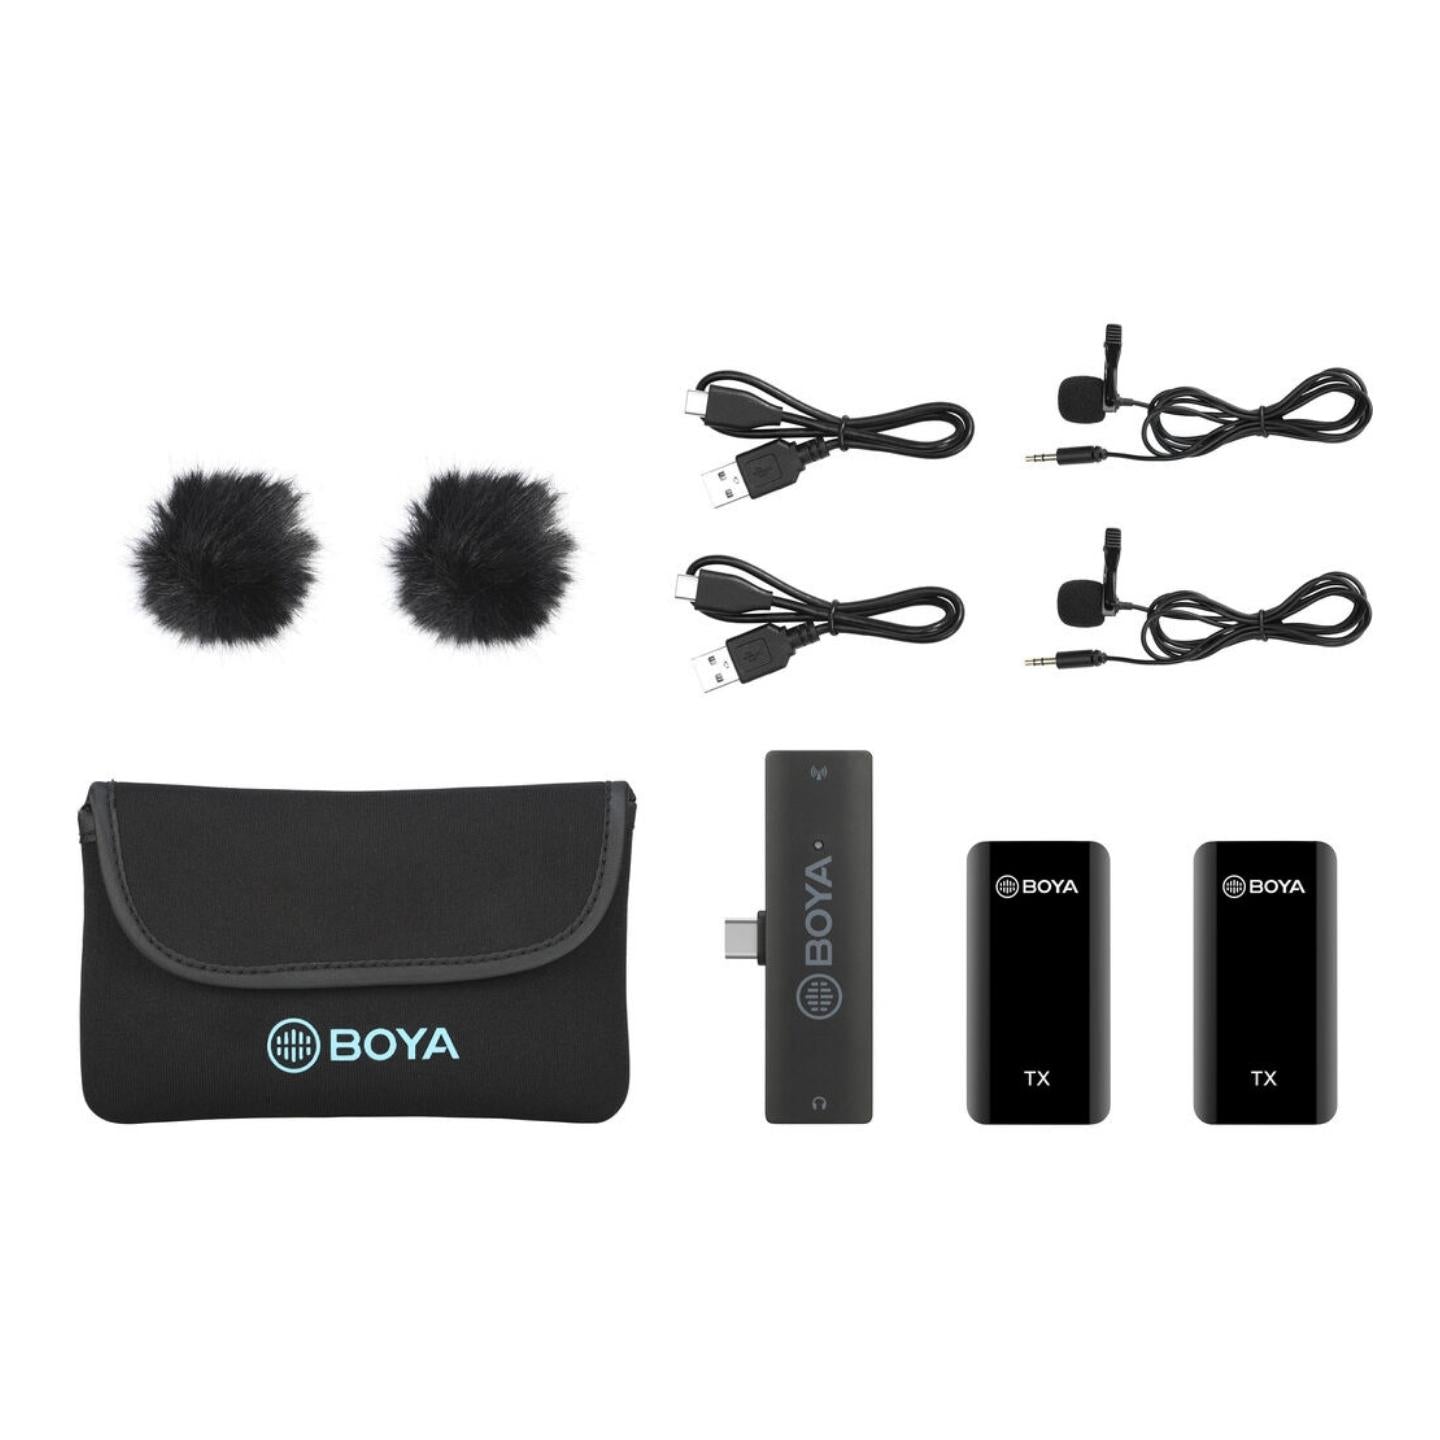 Boya BY-XM6 2.4GHz Dual-Channel Wireless Microphone System with USB Type-C, 100m Range Operation, RXD Receiver, 3.5mm TRS Jack for Smartphones, Tablet, PC | S5, S6